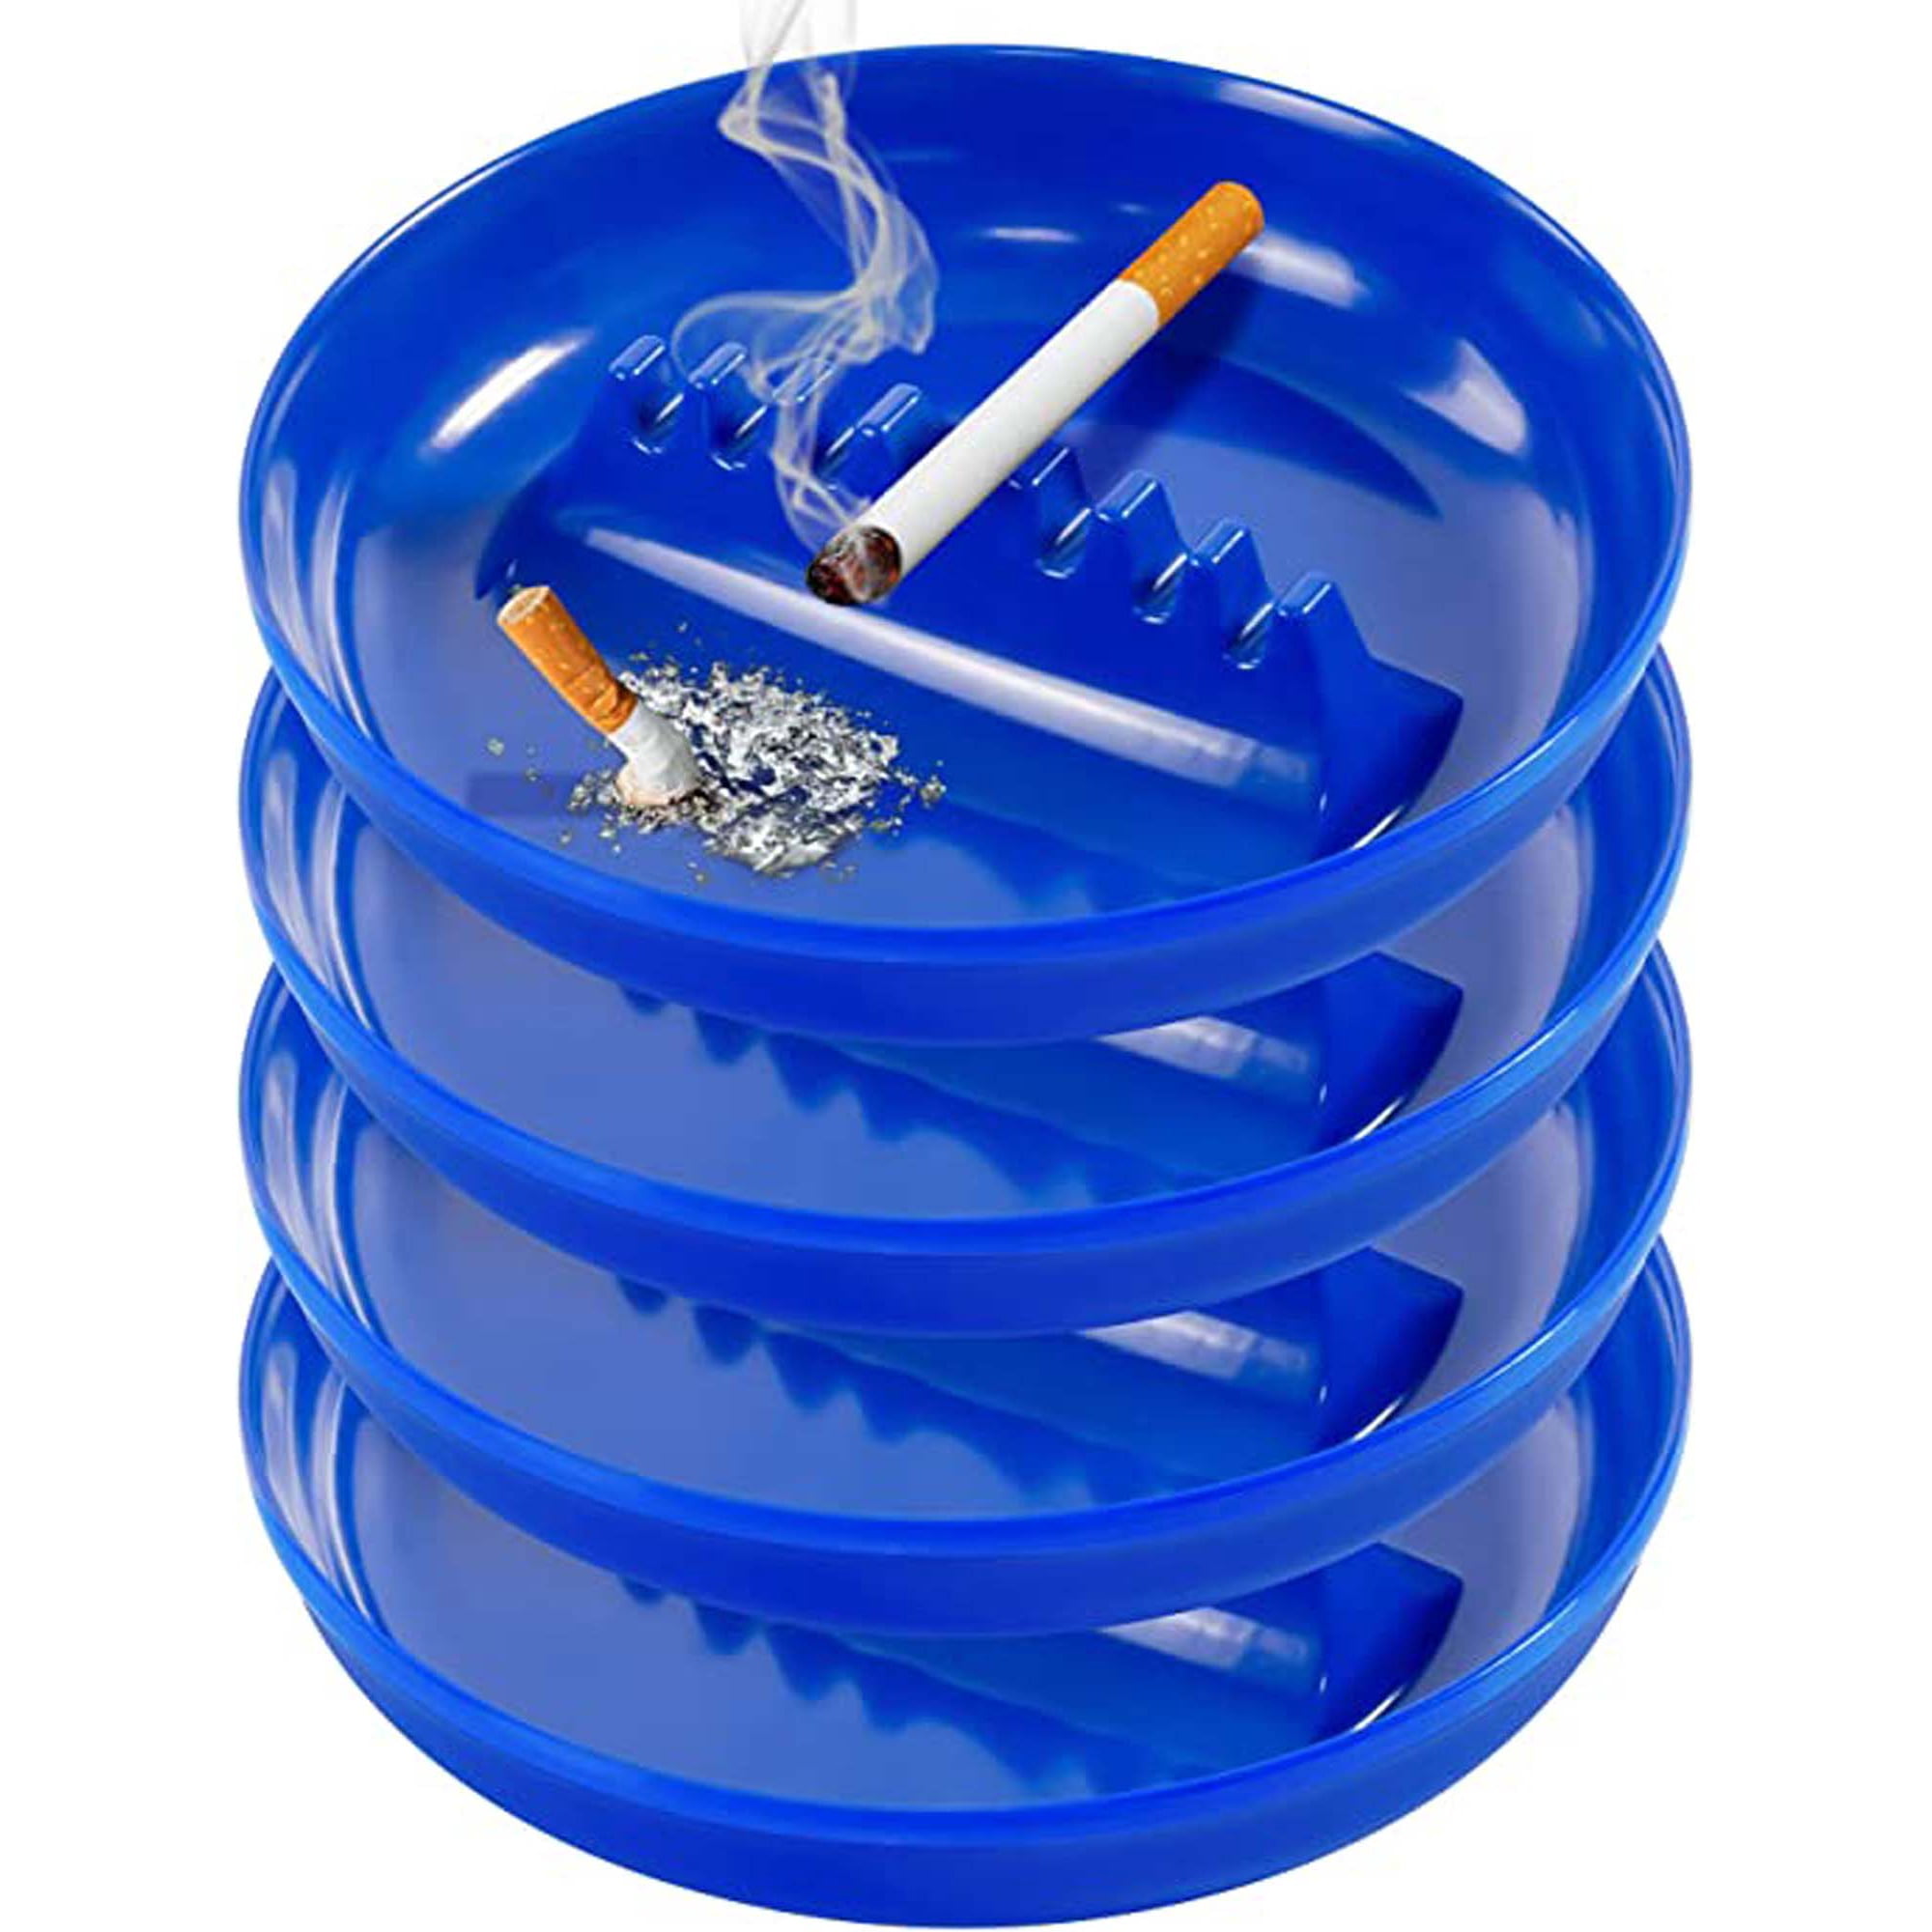 4 Packs Plastic Ashtrays for Cigarettes and Cigars, Indoor Outdoor Ash Tray  Large Size Tabletop Ashtray Decor for Home Office Restaurant Patio Bar,Blue  